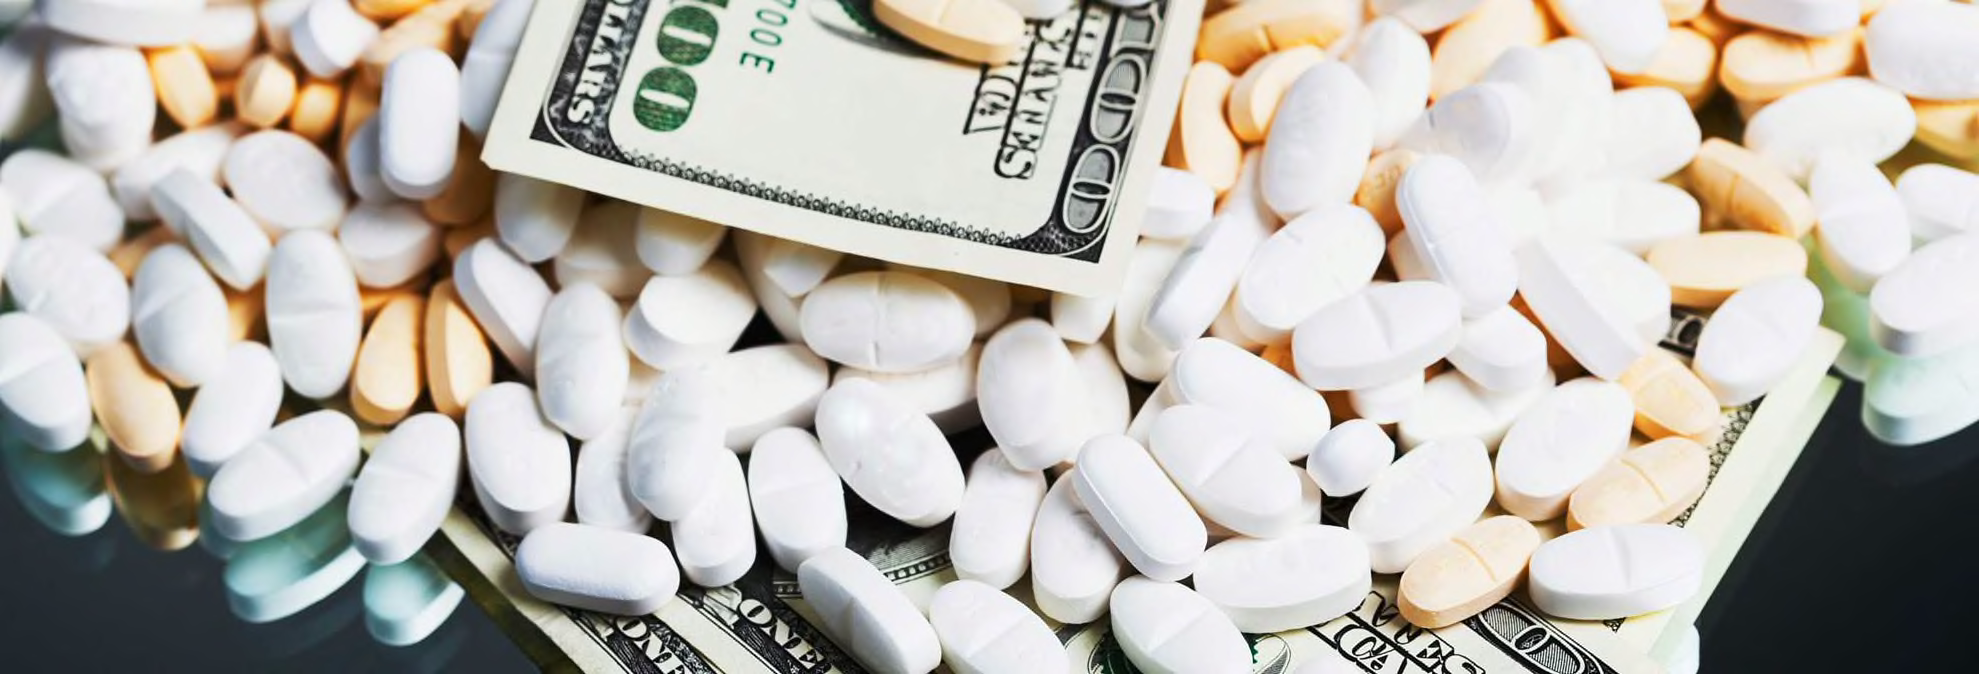 Is There A Cure For High Drug Prices Consumer Reports - 